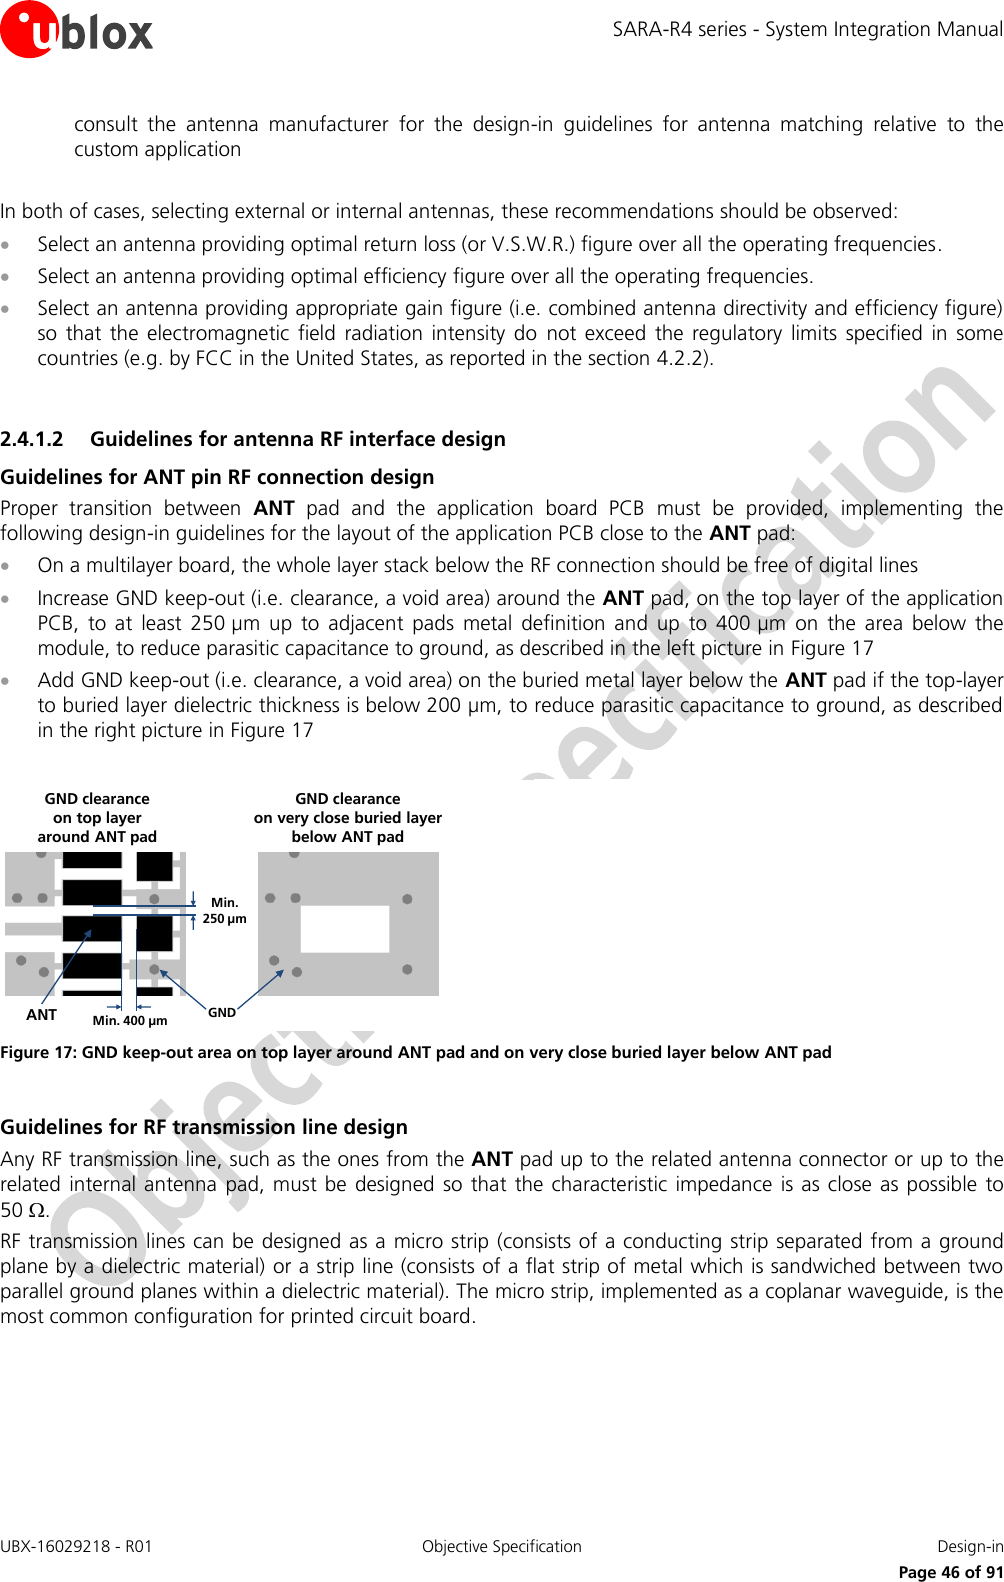 SARA-R4 series - System Integration Manual UBX-16029218 - R01  Objective Specification  Design-in     Page 46 of 91 consult  the  antenna  manufacturer  for  the  design-in  guidelines  for  antenna  matching  relative  to  the custom application  In both of cases, selecting external or internal antennas, these recommendations should be observed:  Select an antenna providing optimal return loss (or V.S.W.R.) figure over all the operating frequencies.  Select an antenna providing optimal efficiency figure over all the operating frequencies.  Select an antenna providing appropriate gain figure (i.e. combined antenna directivity and efficiency figure) so  that the  electromagnetic  field  radiation  intensity  do  not  exceed  the  regulatory  limits  specified  in  some countries (e.g. by FCC in the United States, as reported in the section 4.2.2).  2.4.1.2 Guidelines for antenna RF interface design Guidelines for ANT pin RF connection design Proper  transition  between  ANT  pad  and  the  application  board  PCB  must  be  provided,  implementing  the following design-in guidelines for the layout of the application PCB close to the ANT pad:  On a multilayer board, the whole layer stack below the RF connection should be free of digital lines  Increase GND keep-out (i.e. clearance, a void area) around the ANT pad, on the top layer of the application PCB,  to  at  least  250 µm  up  to  adjacent  pads  metal  definition  and  up  to  400 µm  on  the  area  below  the module, to reduce parasitic capacitance to ground, as described in the left picture in Figure 17  Add GND keep-out (i.e. clearance, a void area) on the buried metal layer below the ANT pad if the top-layer to buried layer dielectric thickness is below 200 µm, to reduce parasitic capacitance to ground, as described in the right picture in Figure 17  Min. 250 µmMin. 400 µm GNDANTGND clearance on very close buried layerbelow ANT padGND clearance on top layer around ANT pad Figure 17: GND keep-out area on top layer around ANT pad and on very close buried layer below ANT pad  Guidelines for RF transmission line design Any RF transmission line, such as the ones from the ANT pad up to the related antenna connector or up to the related internal antenna  pad, must be  designed  so  that the characteristic  impedance is as close  as possible  to 50 . RF transmission lines can be designed as a micro strip (consists of a conducting strip separated from a ground plane by a dielectric material) or a strip line (consists of a flat strip of metal which is sandwiched between two parallel ground planes within a dielectric material). The micro strip, implemented as a coplanar waveguide, is the most common configuration for printed circuit board.  